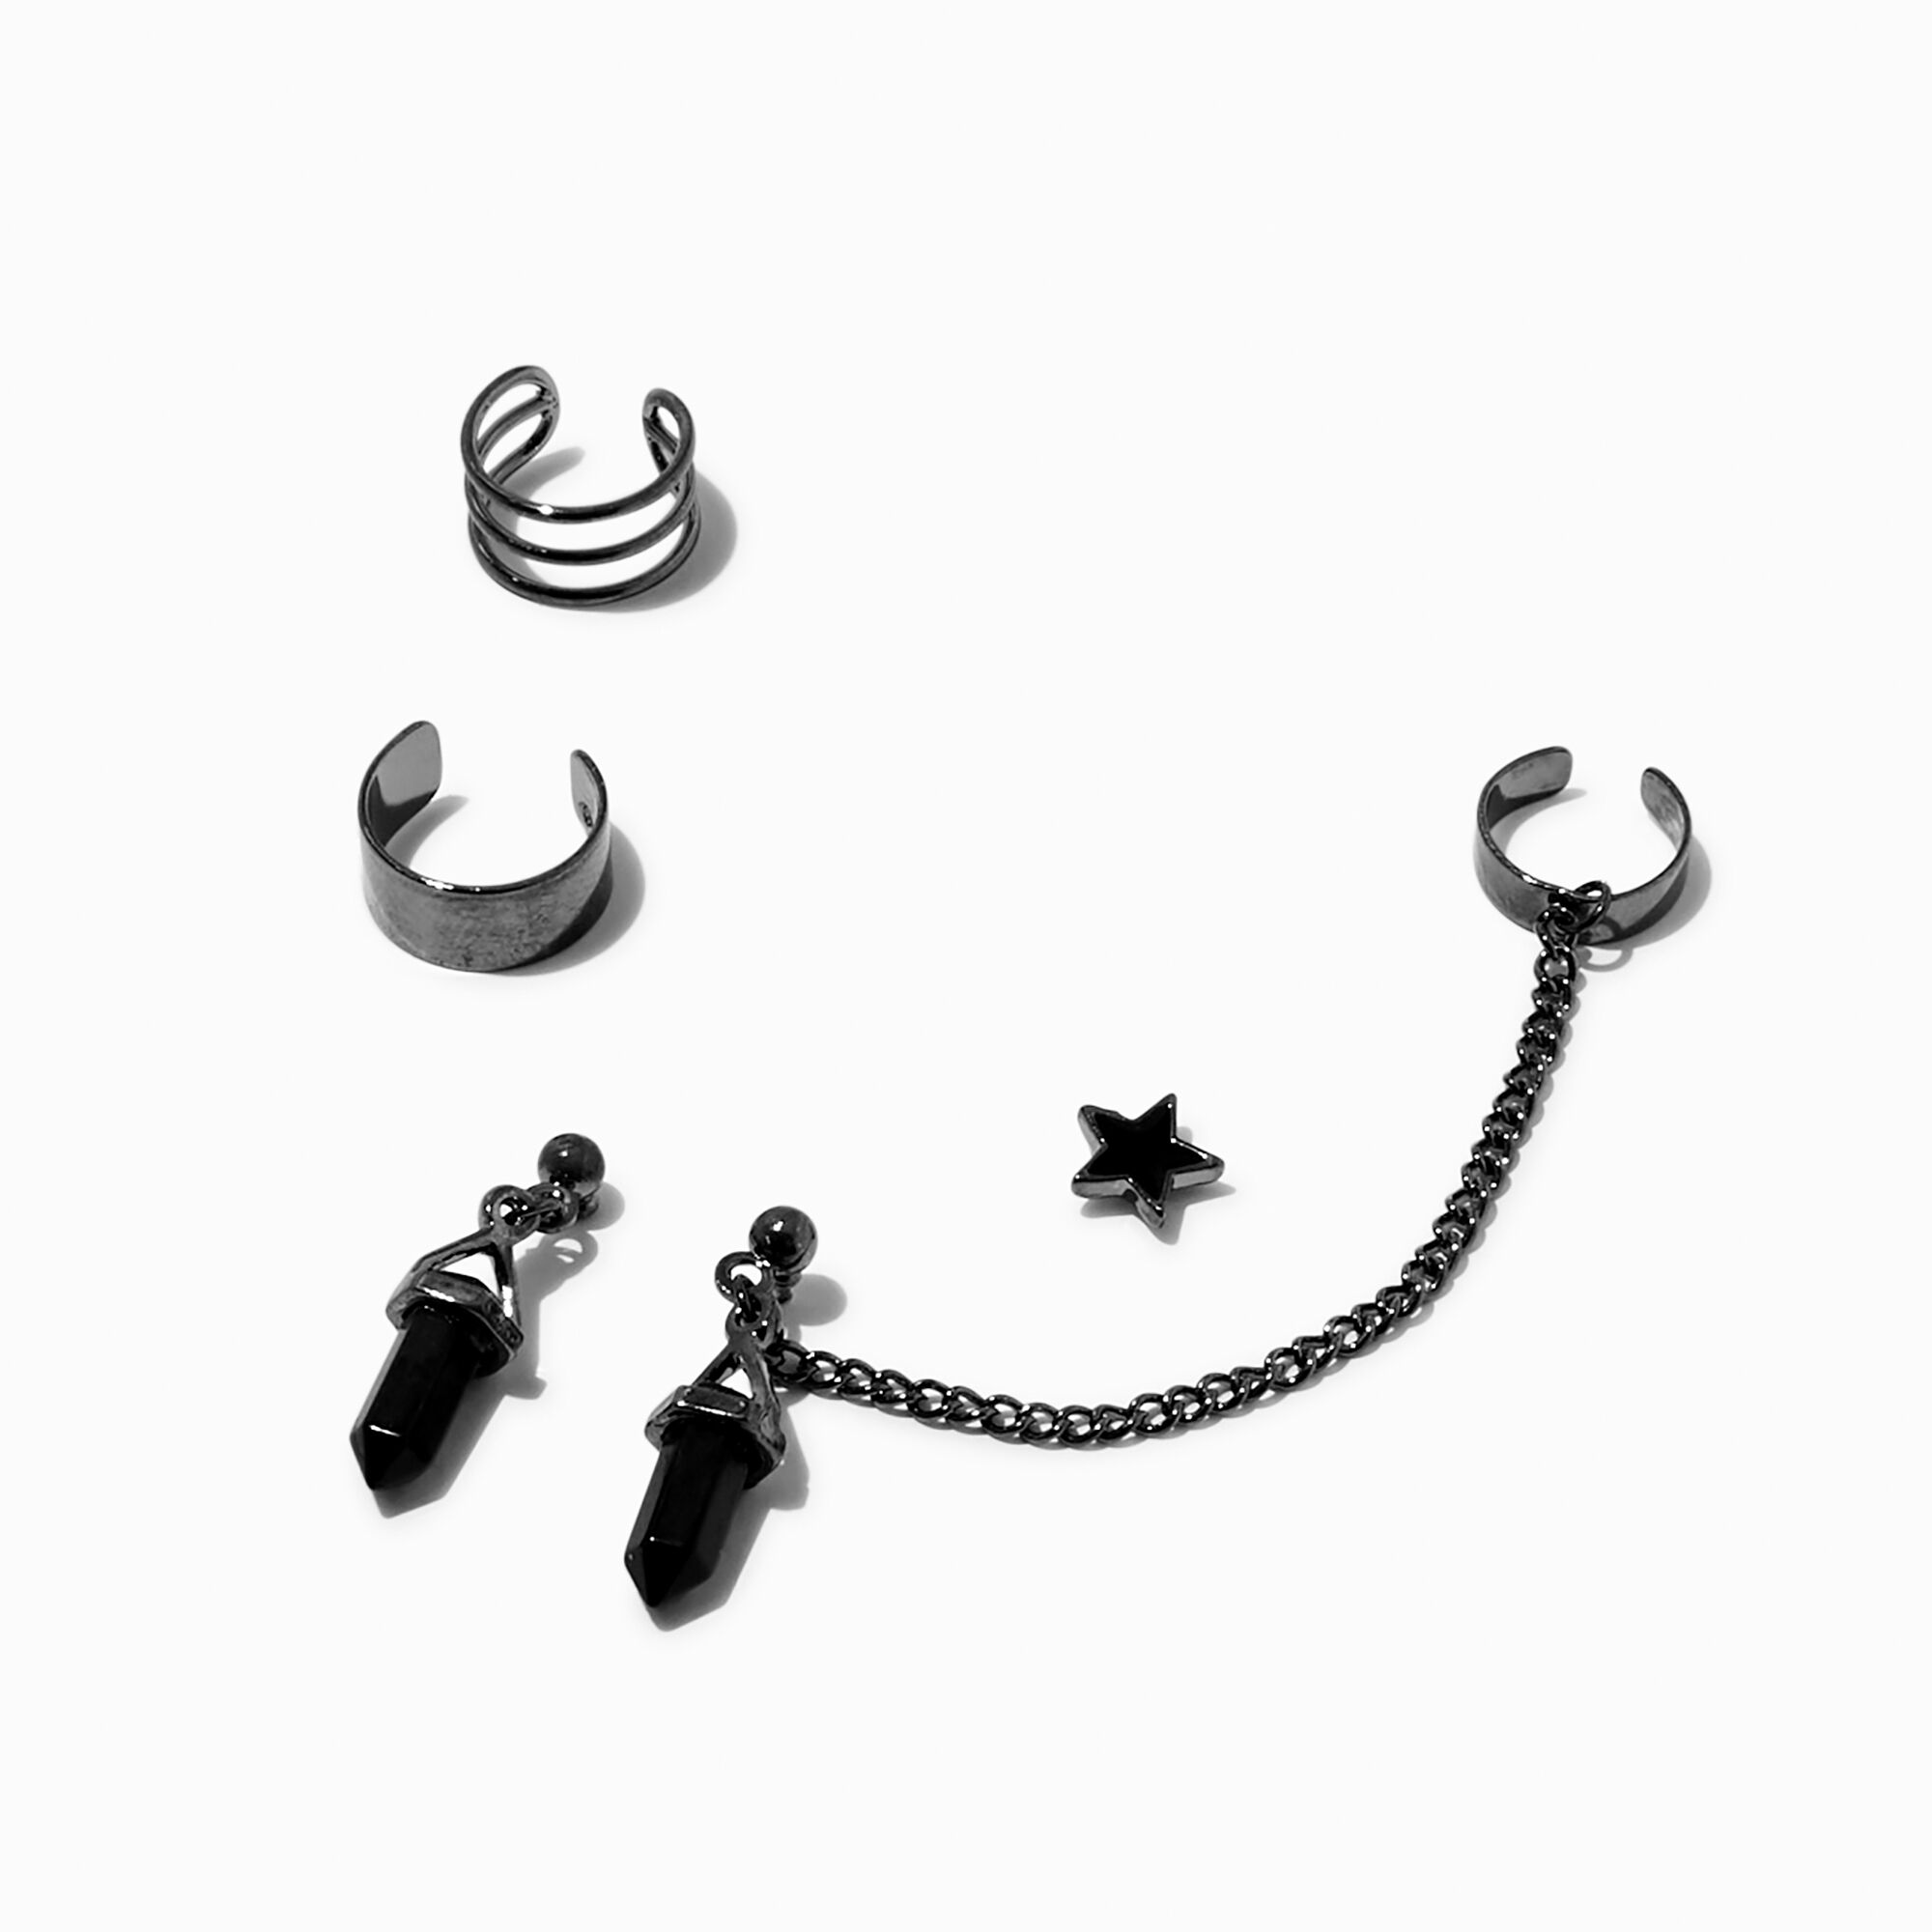 View Claires Mystical Gem Star Connector Cuff Earrings Stackables 5 Pack Black information